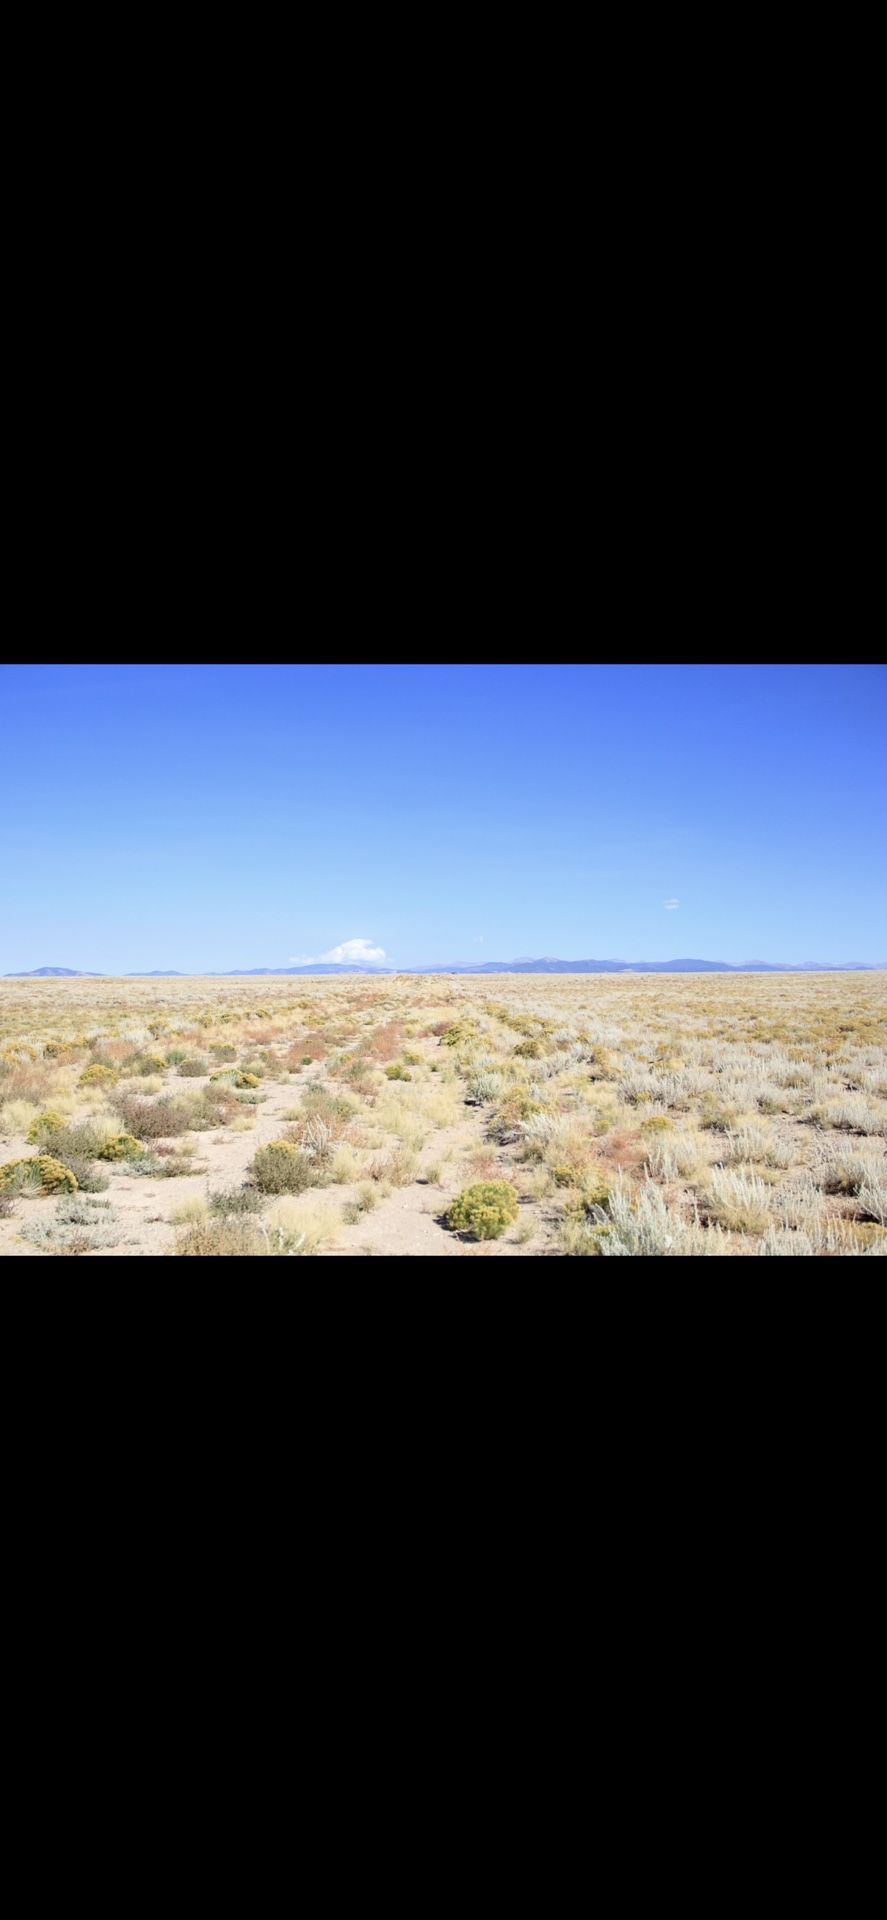 5 Acres In Costilla County, CO For $5,499!